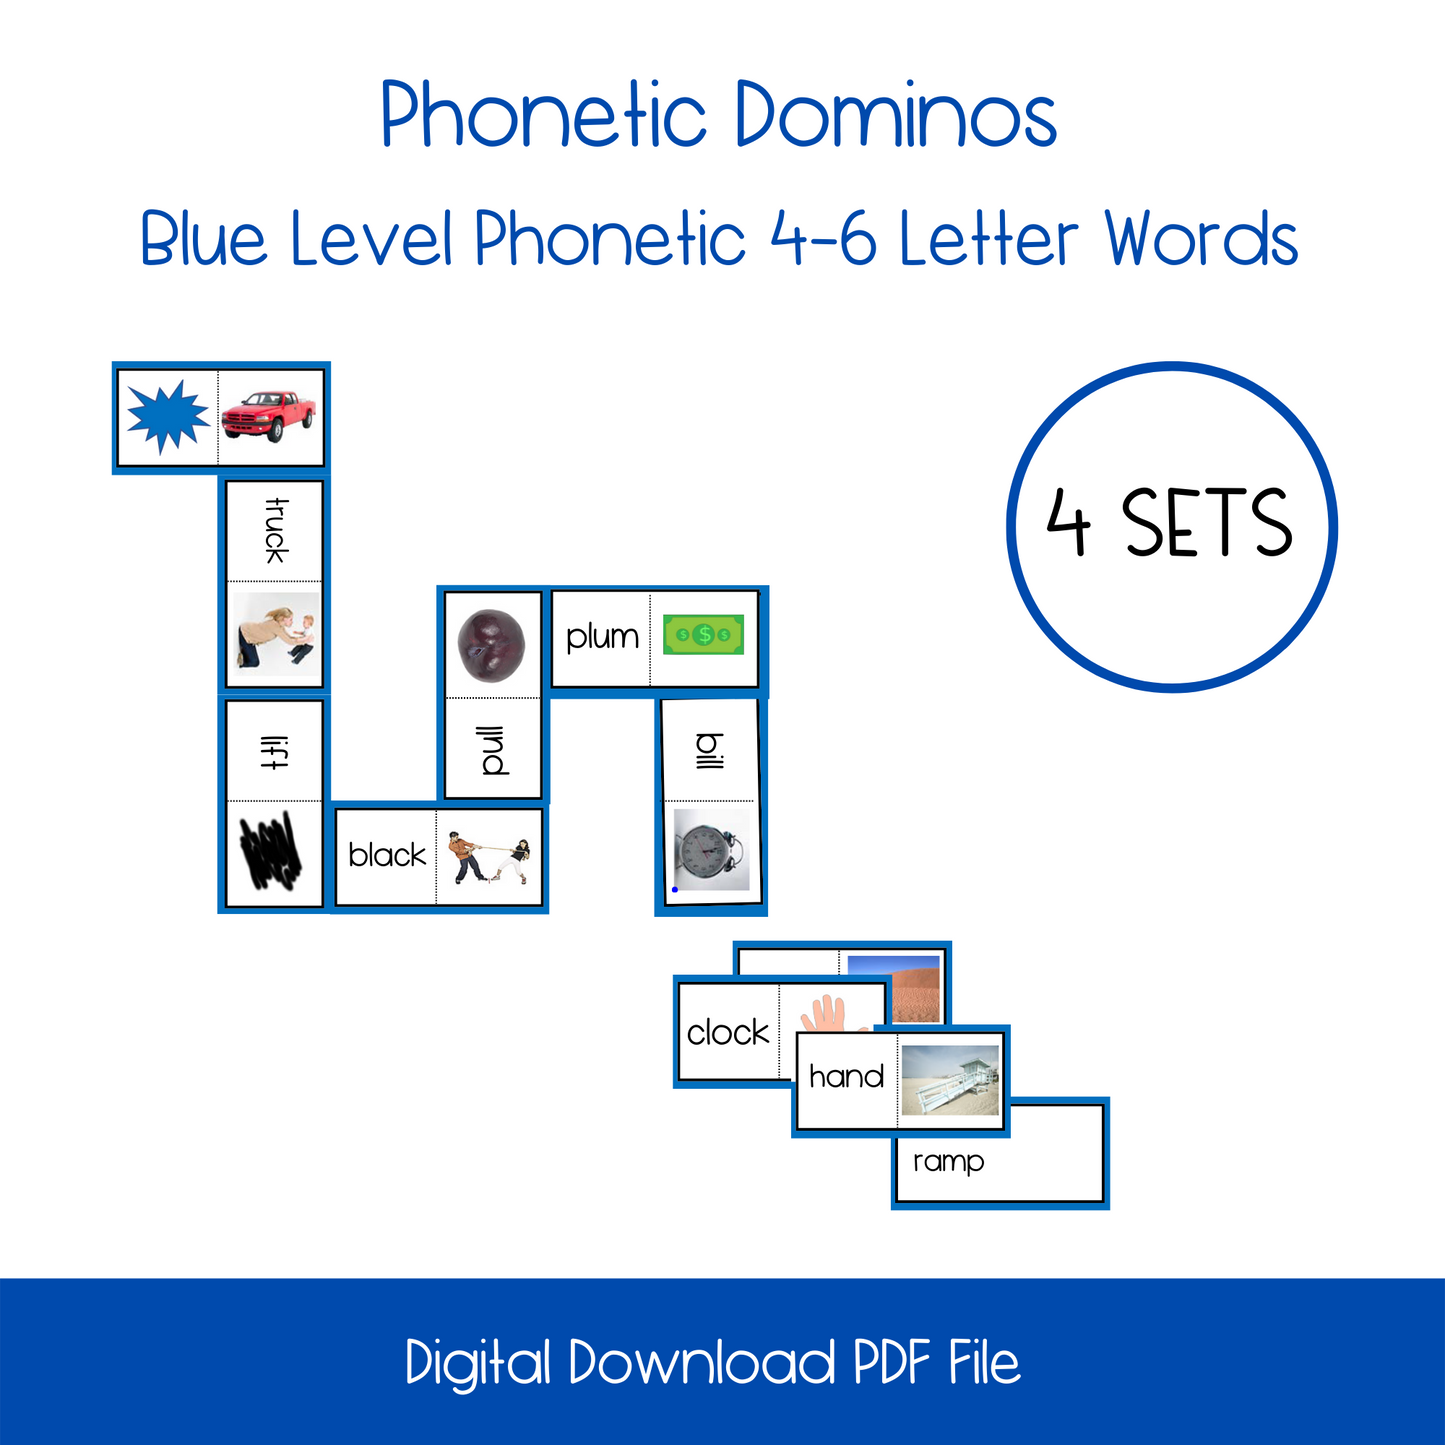 Printable Phonetic Reading Sounds Activity, printable Montessori Printable Phonetic Reading Sounds Activity, printable Phonetic reading game activity, Printable homeschool Phonetic Reading Sounds Activity, Printable montessoriPhonetic Reading Sounds Activity, printable Phonetic reading activity, printable ESL activity